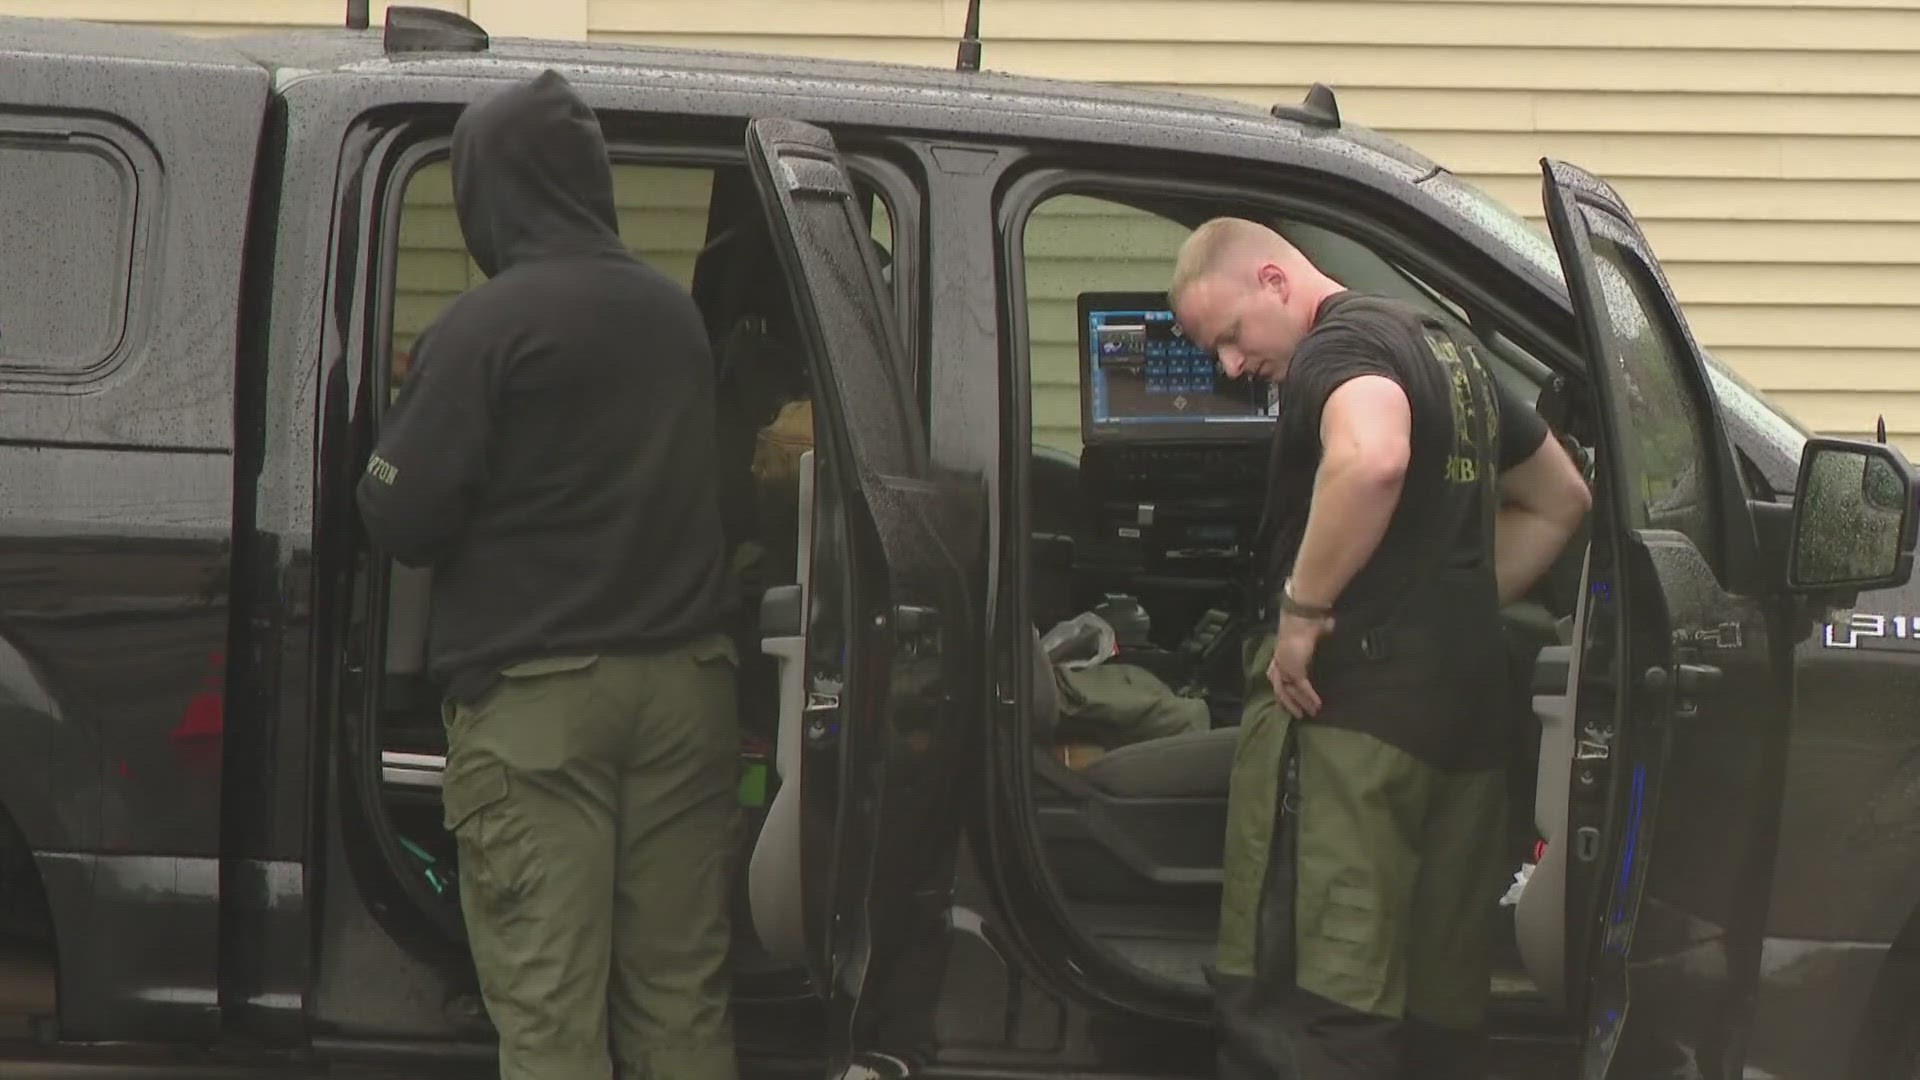 The Maine State Police Bomb Squad responded to investigate the package, according to Topsham police.